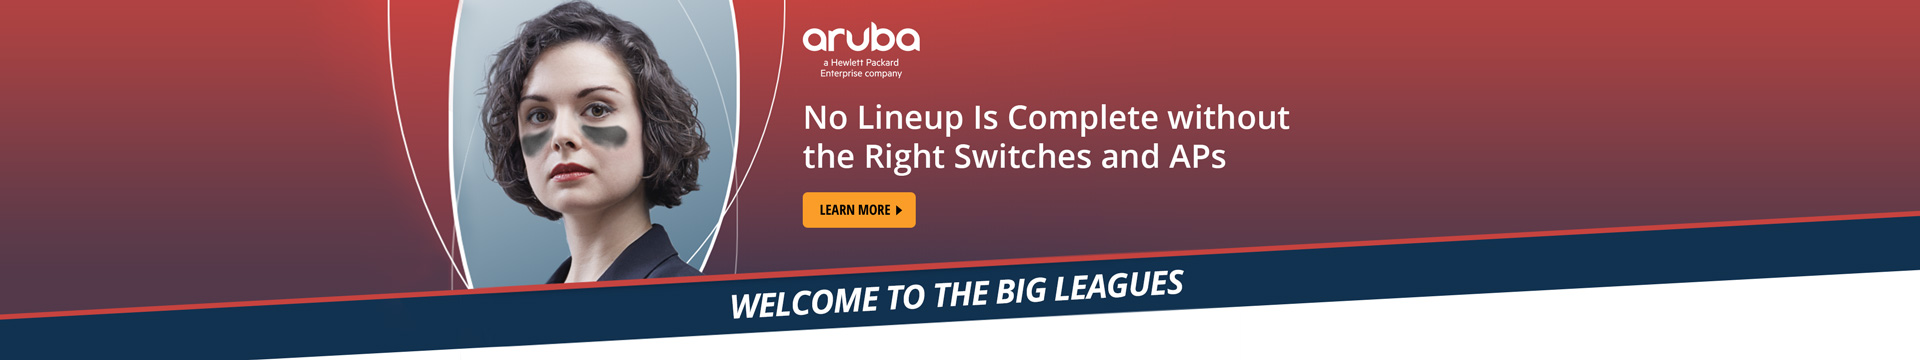 Aruba No Lineup is Complete without the right switches and APs